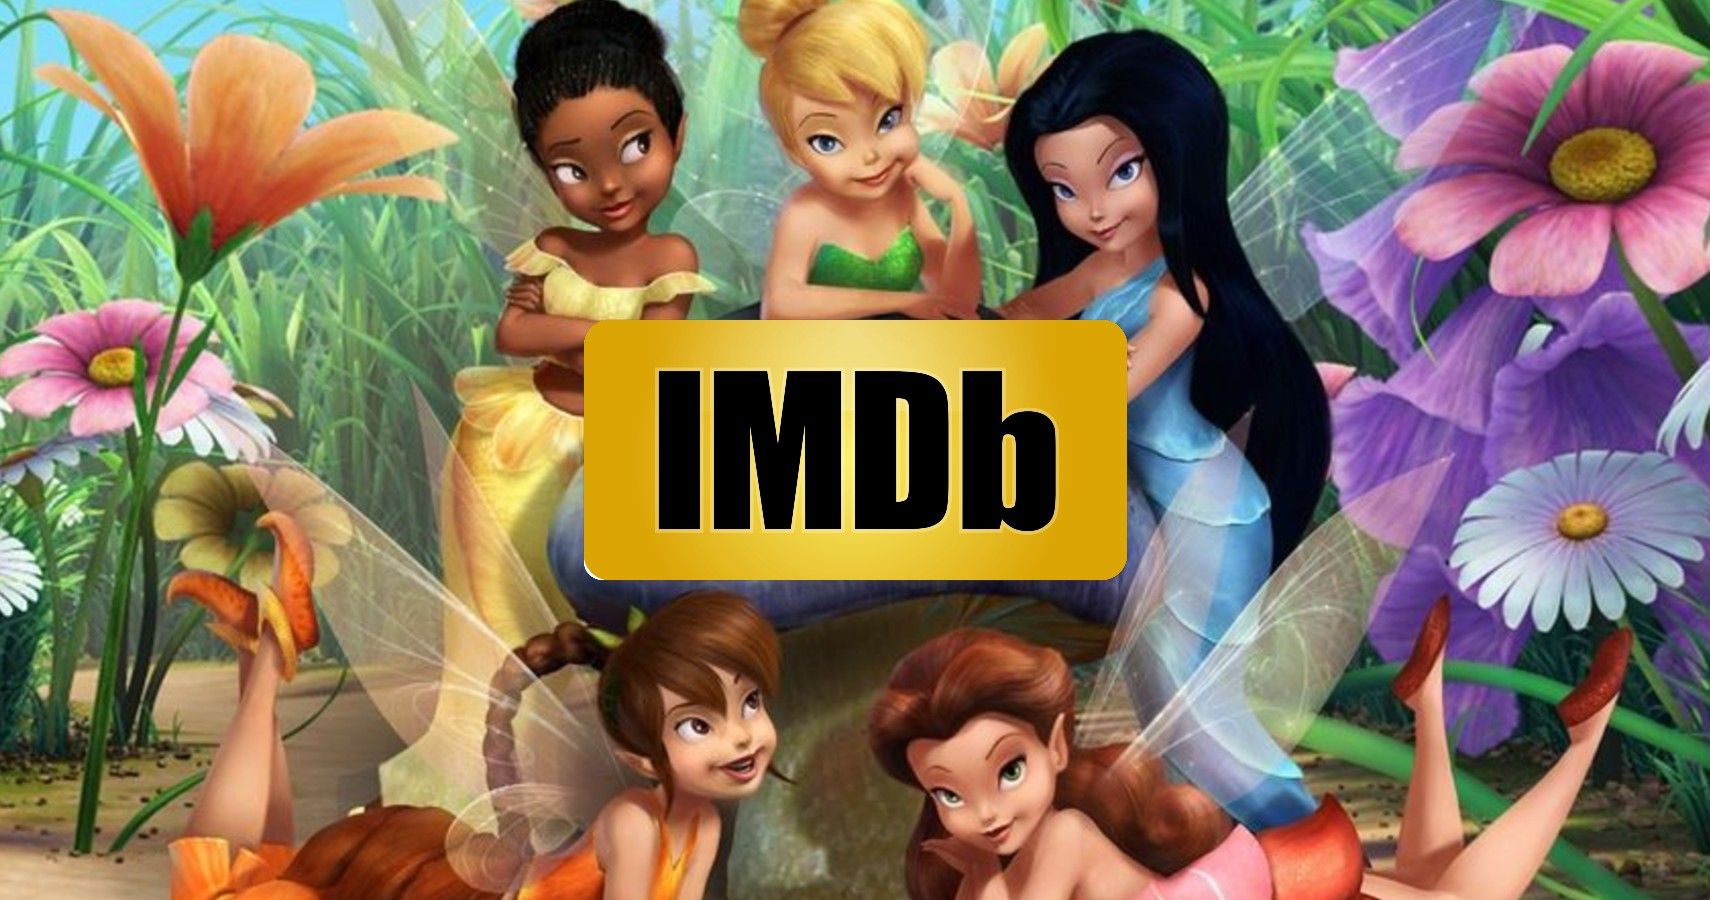 Disney: Ranking All Of The Tinker Bell Movies, According To IMDb Score